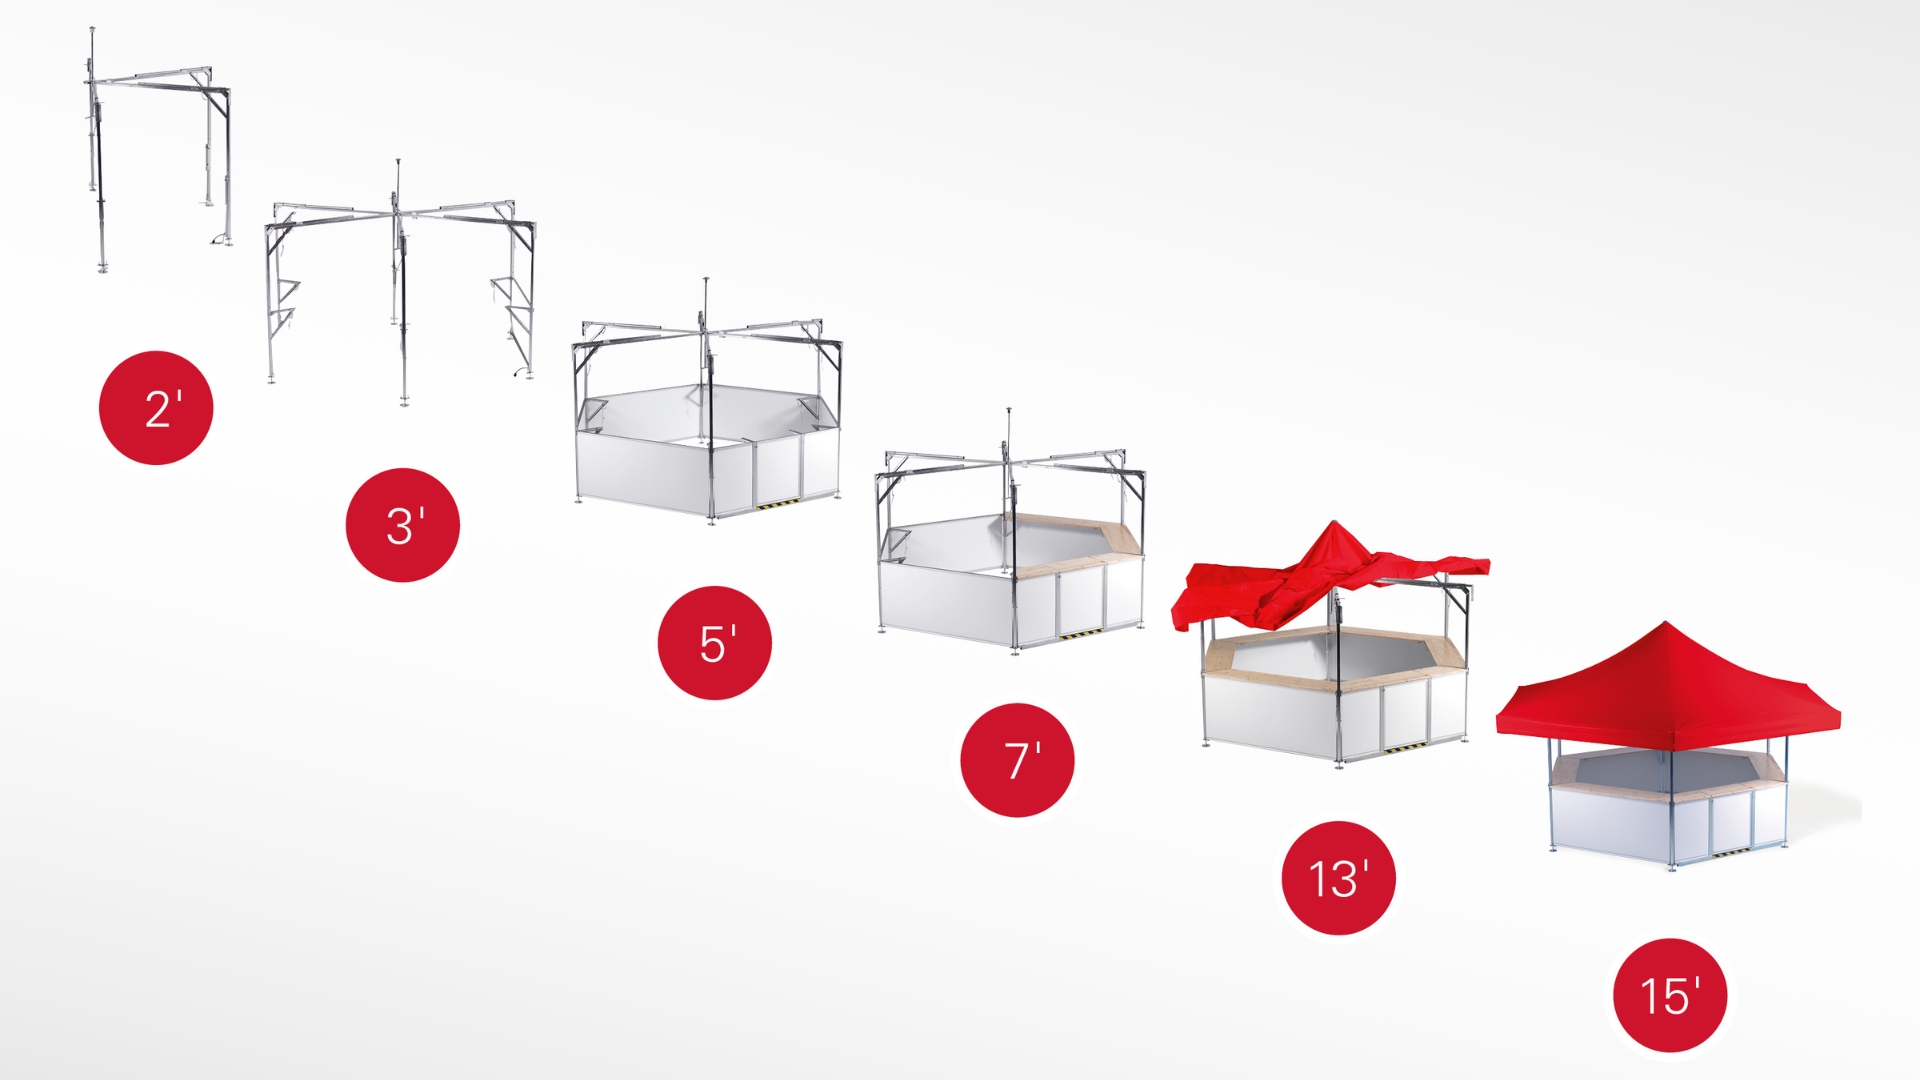 The individual steps of the construction of a beer stand are shown. In only 15 minutes, the beer stand can be assembled and disassembled by 2 people. 